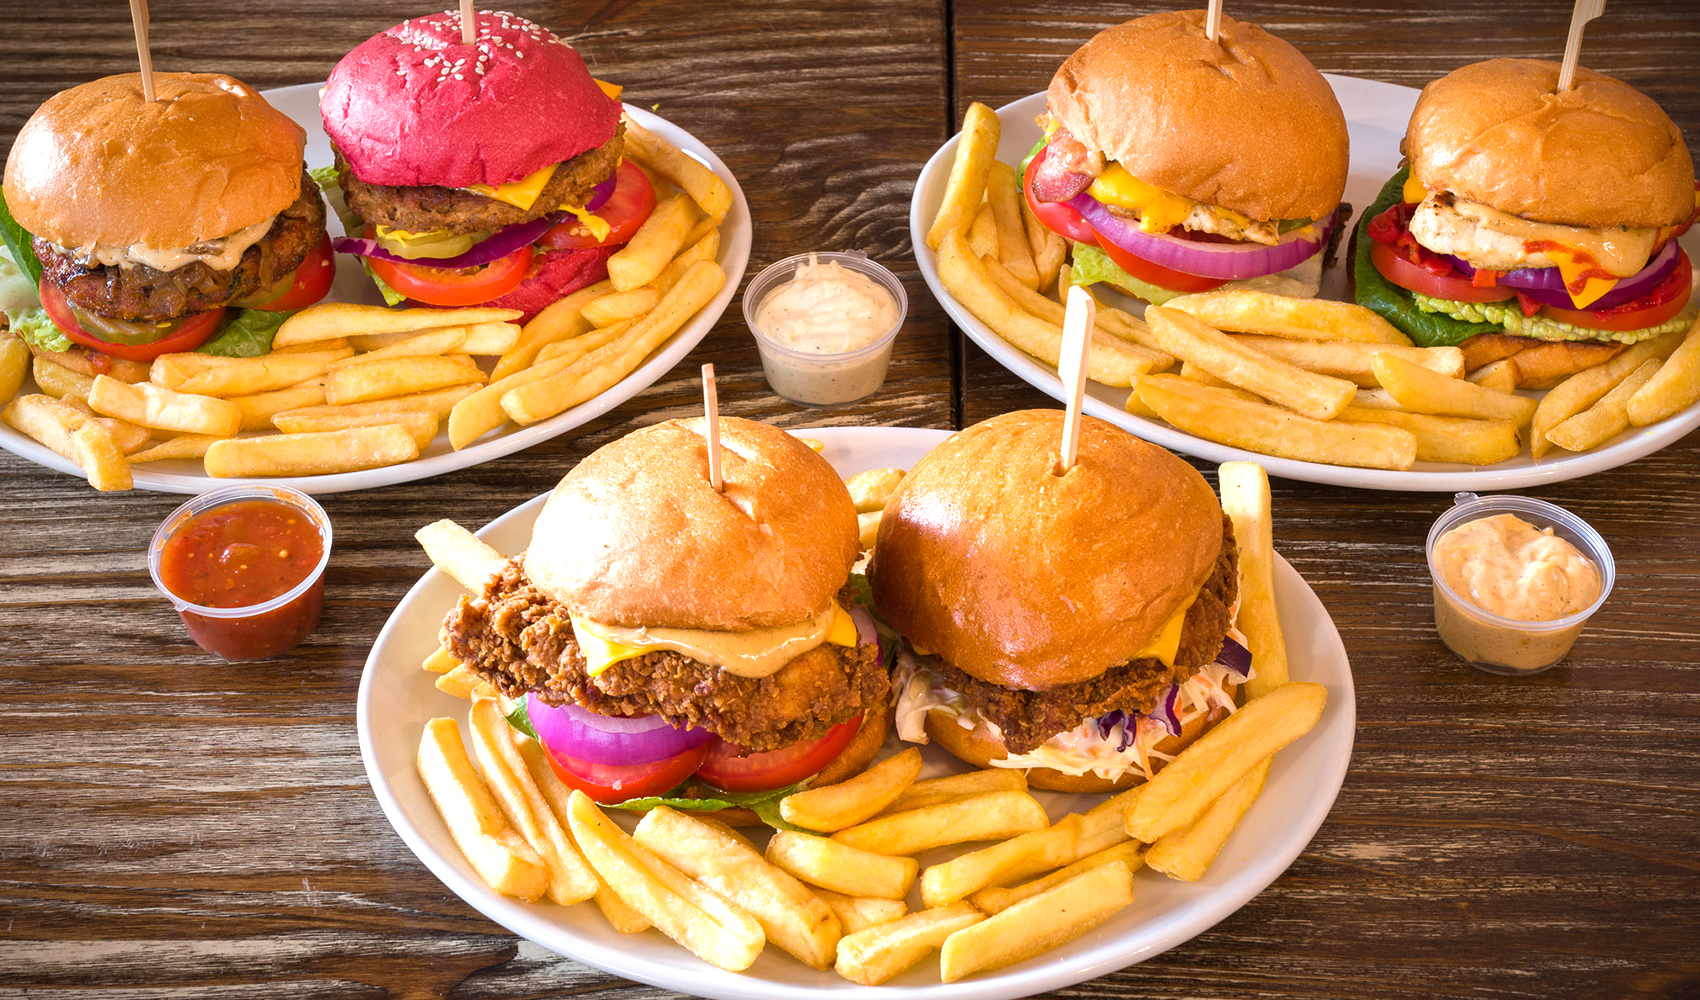 Cookhouse Burgers